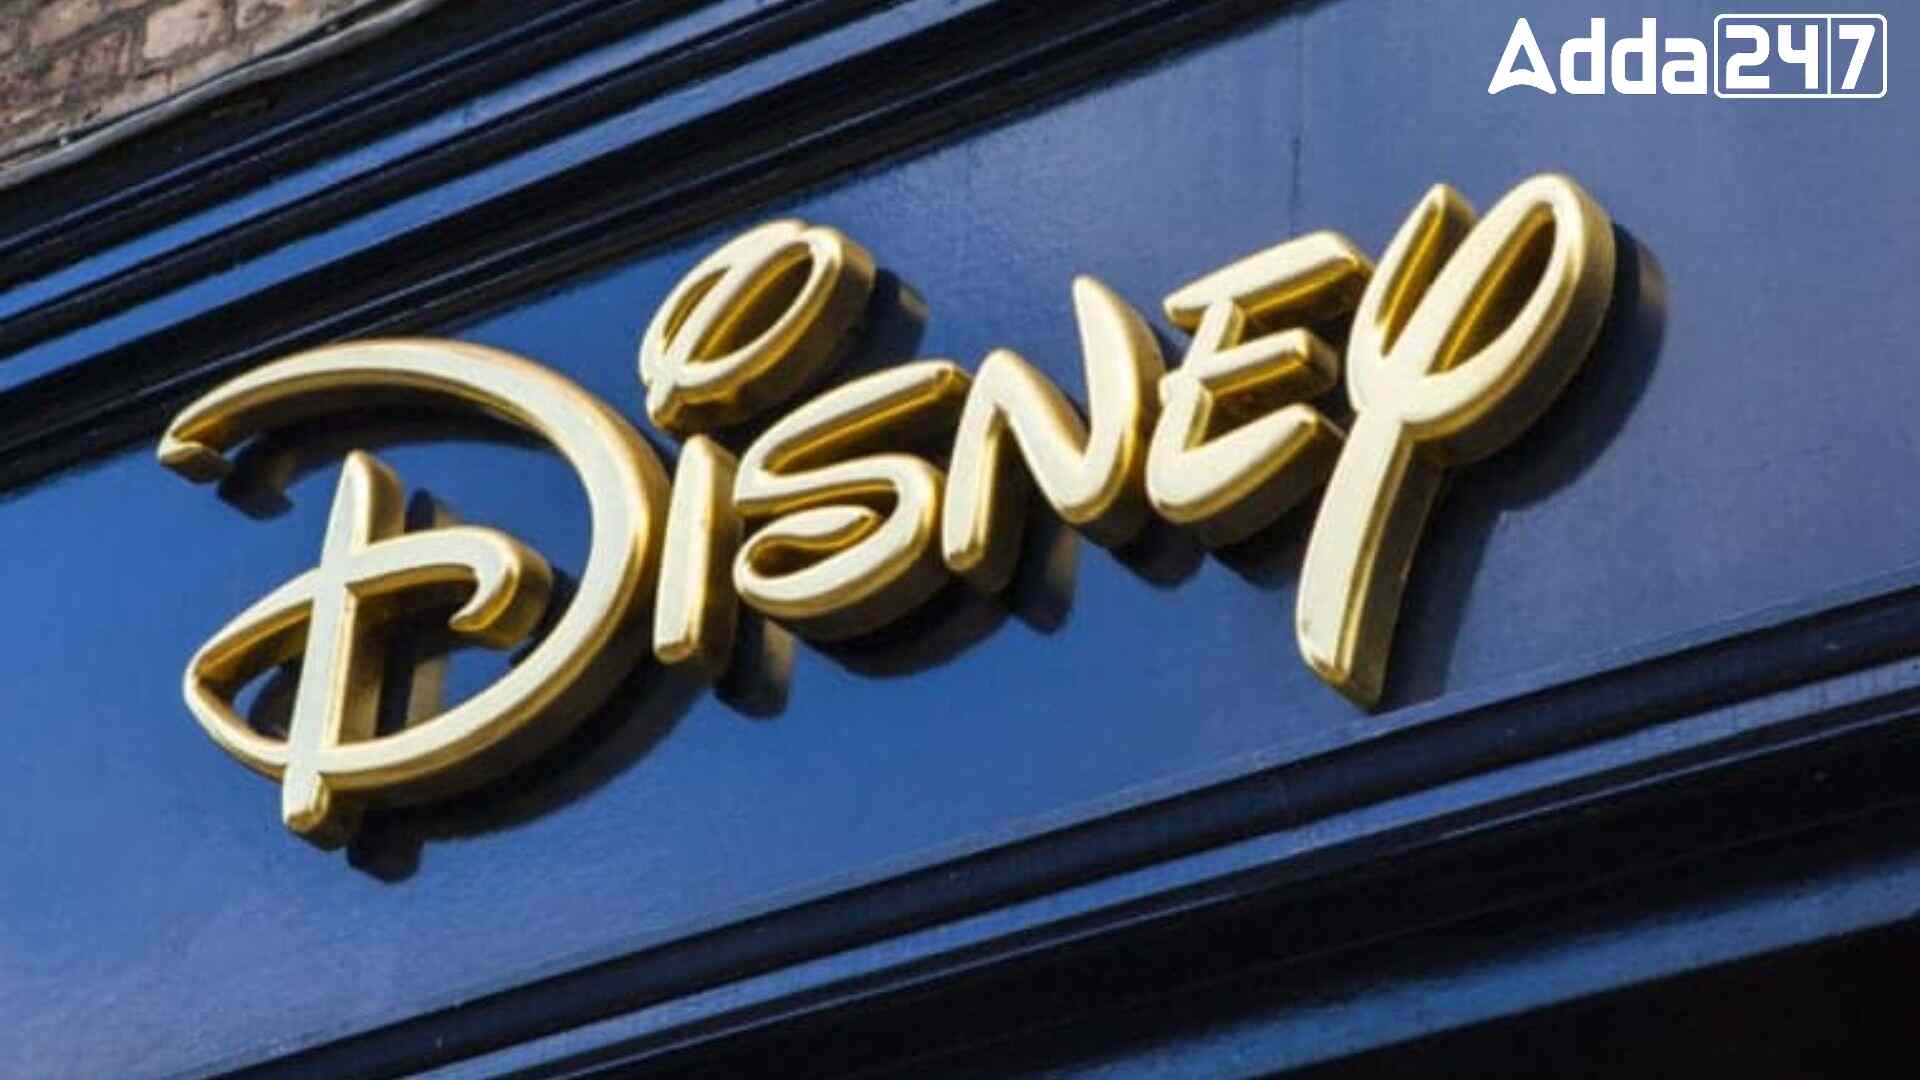 Disney to Sell 30% Stake in Tata Play to Tata Group, Valuing Company at $1 Billion